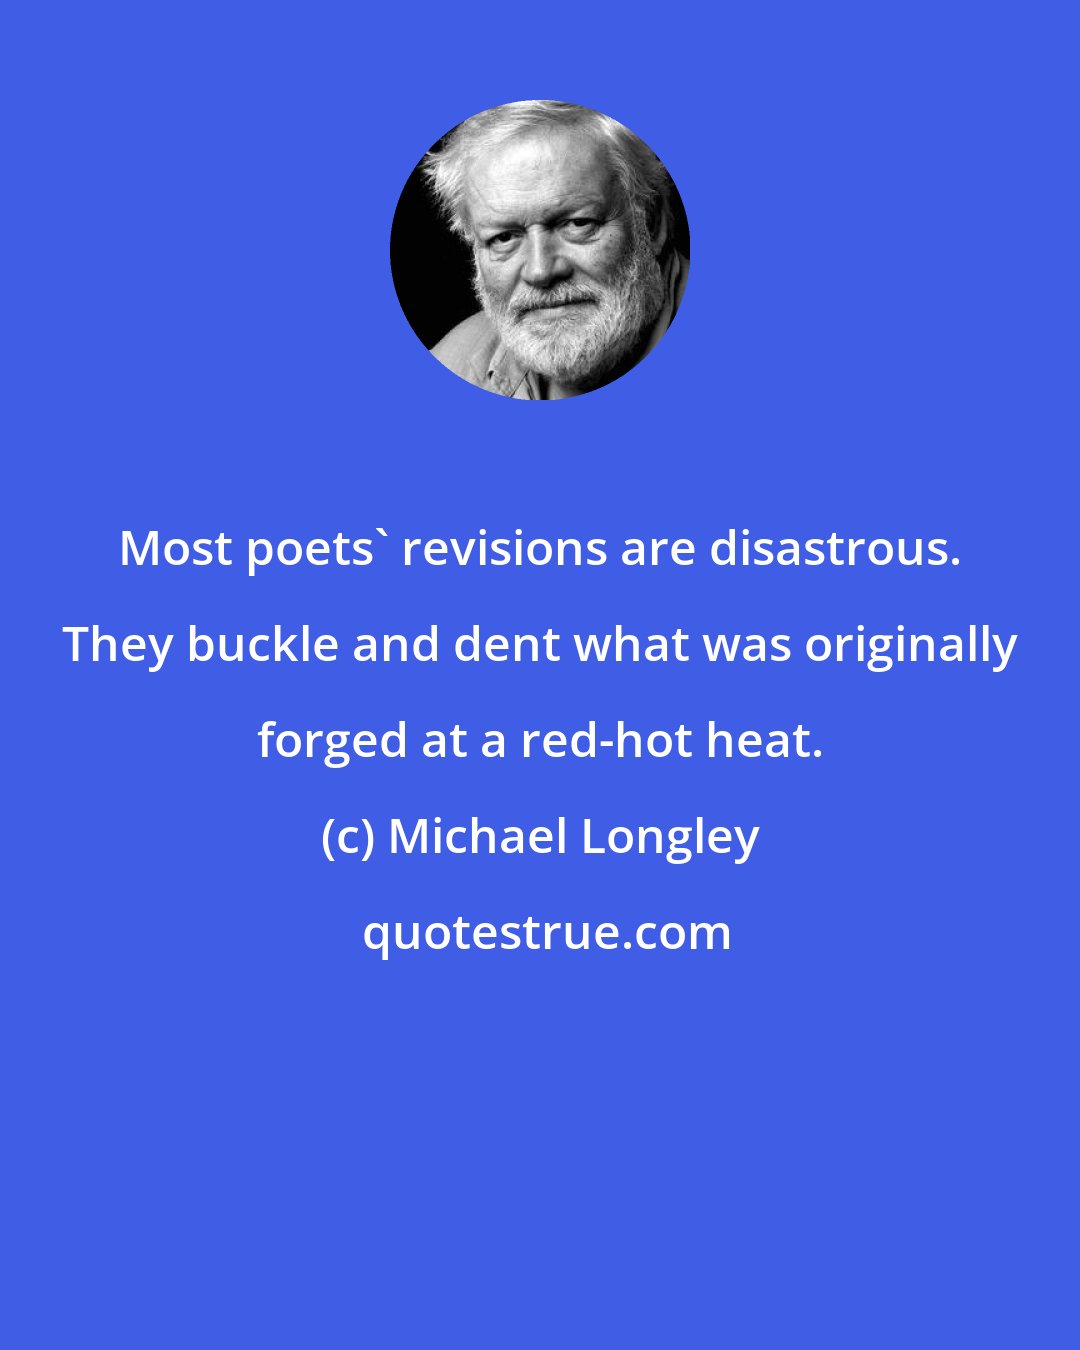 Michael Longley: Most poets' revisions are disastrous. They buckle and dent what was originally forged at a red-hot heat.